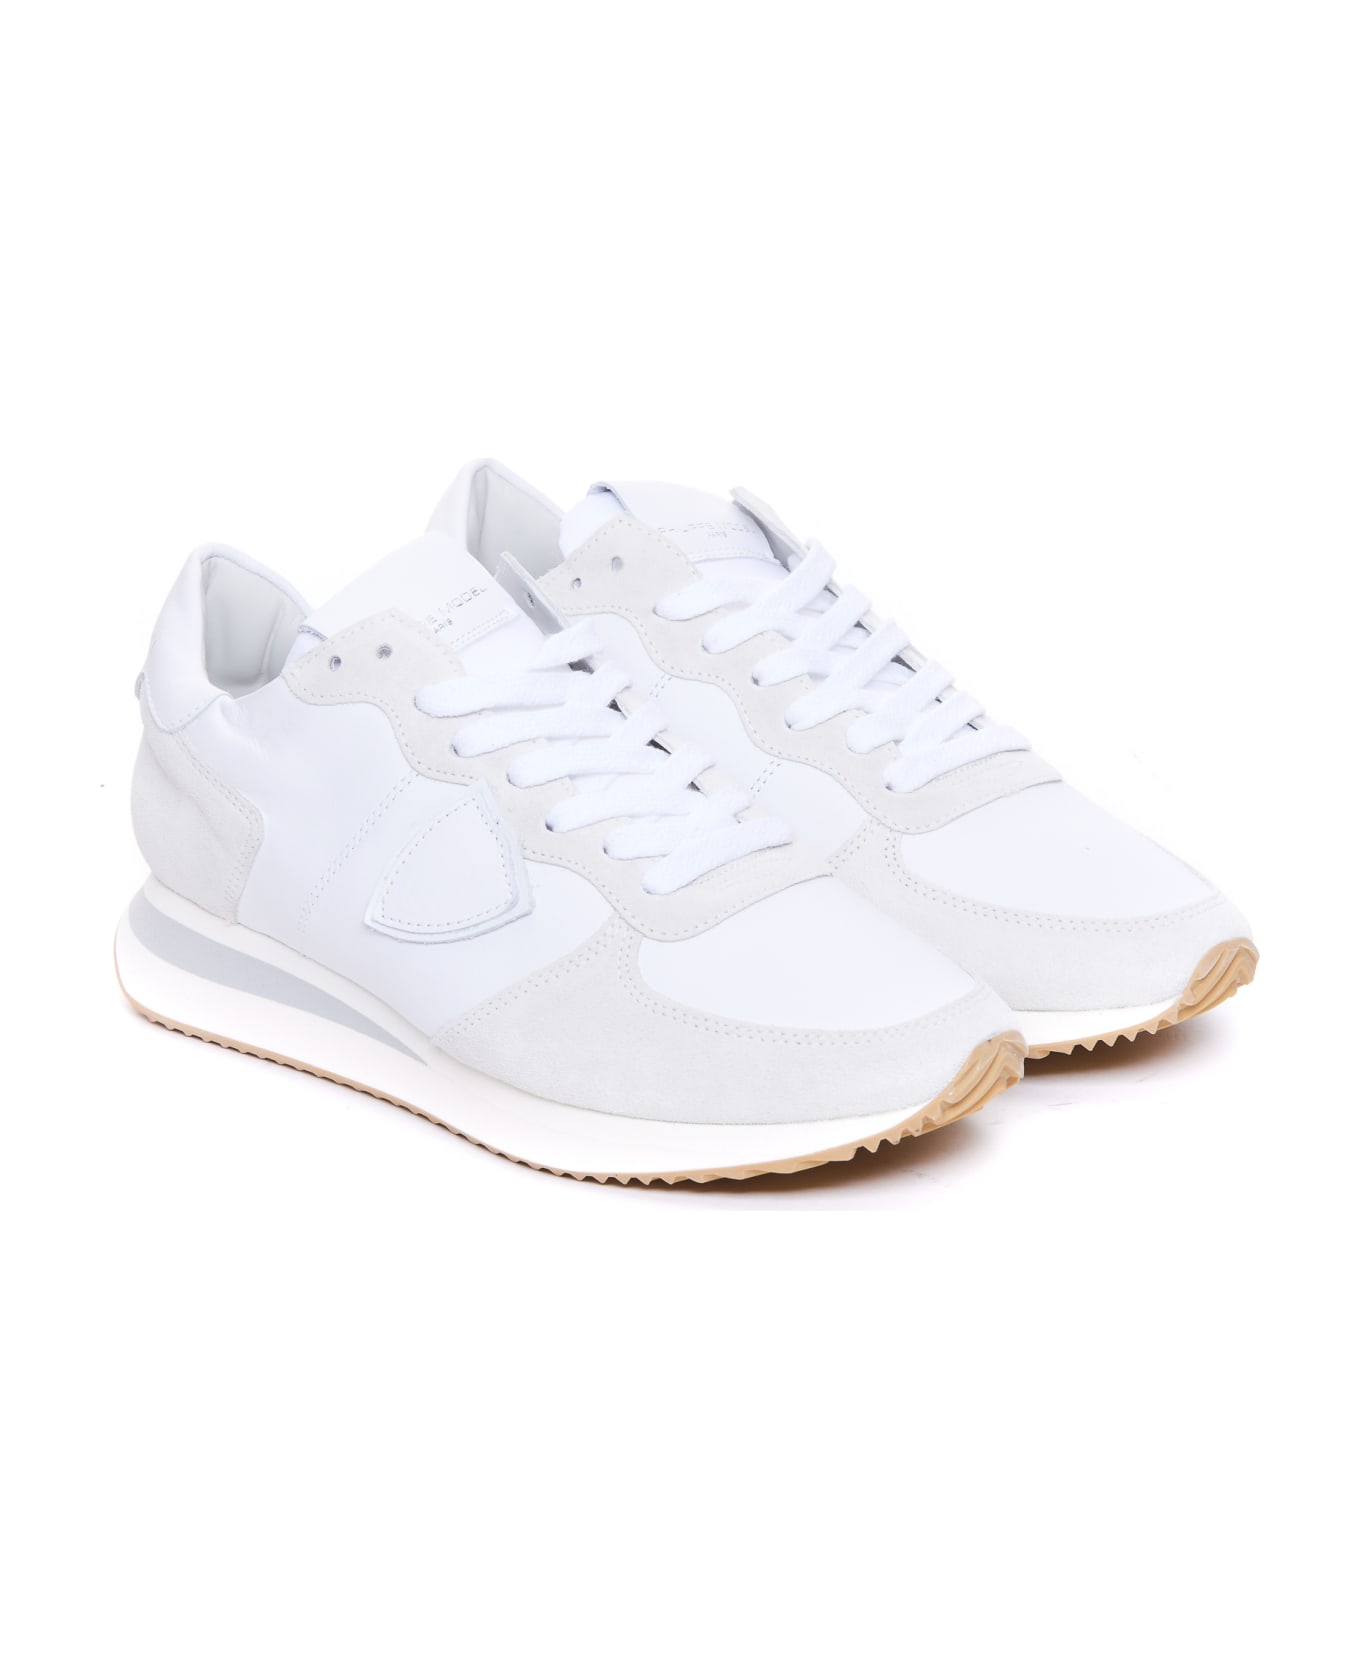 Philippe Model Trpx Sneakers - White